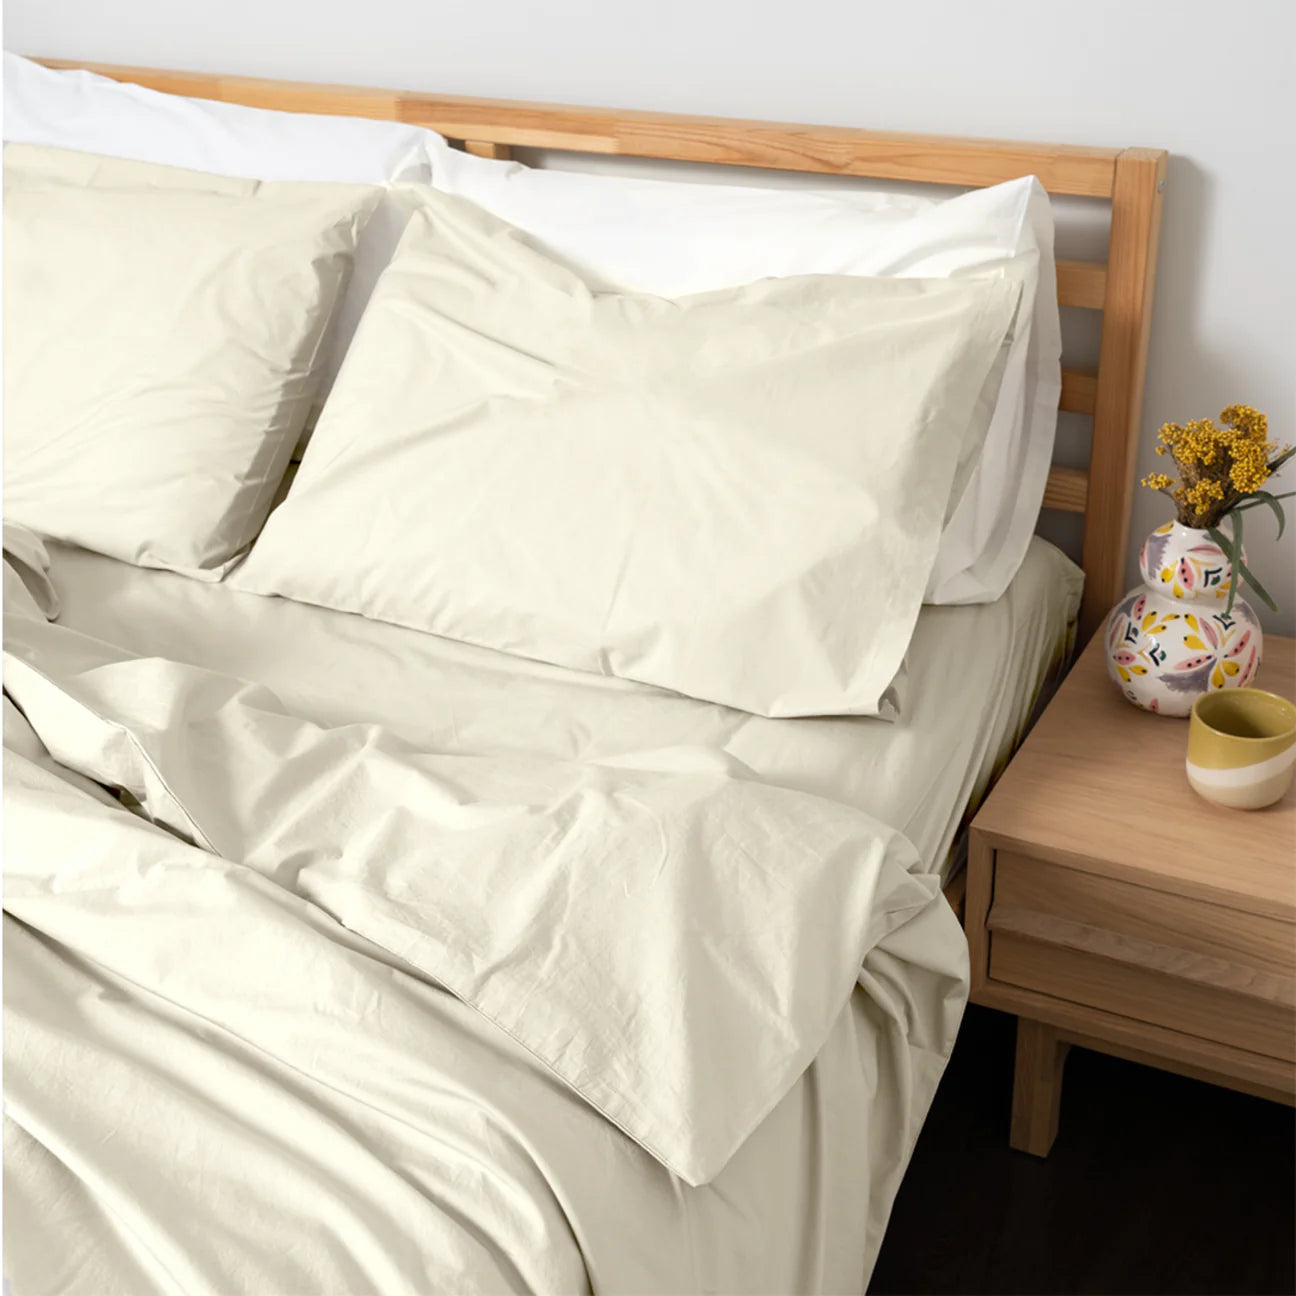 Organic Cotton Percale Duvet Cover and Pillowcases